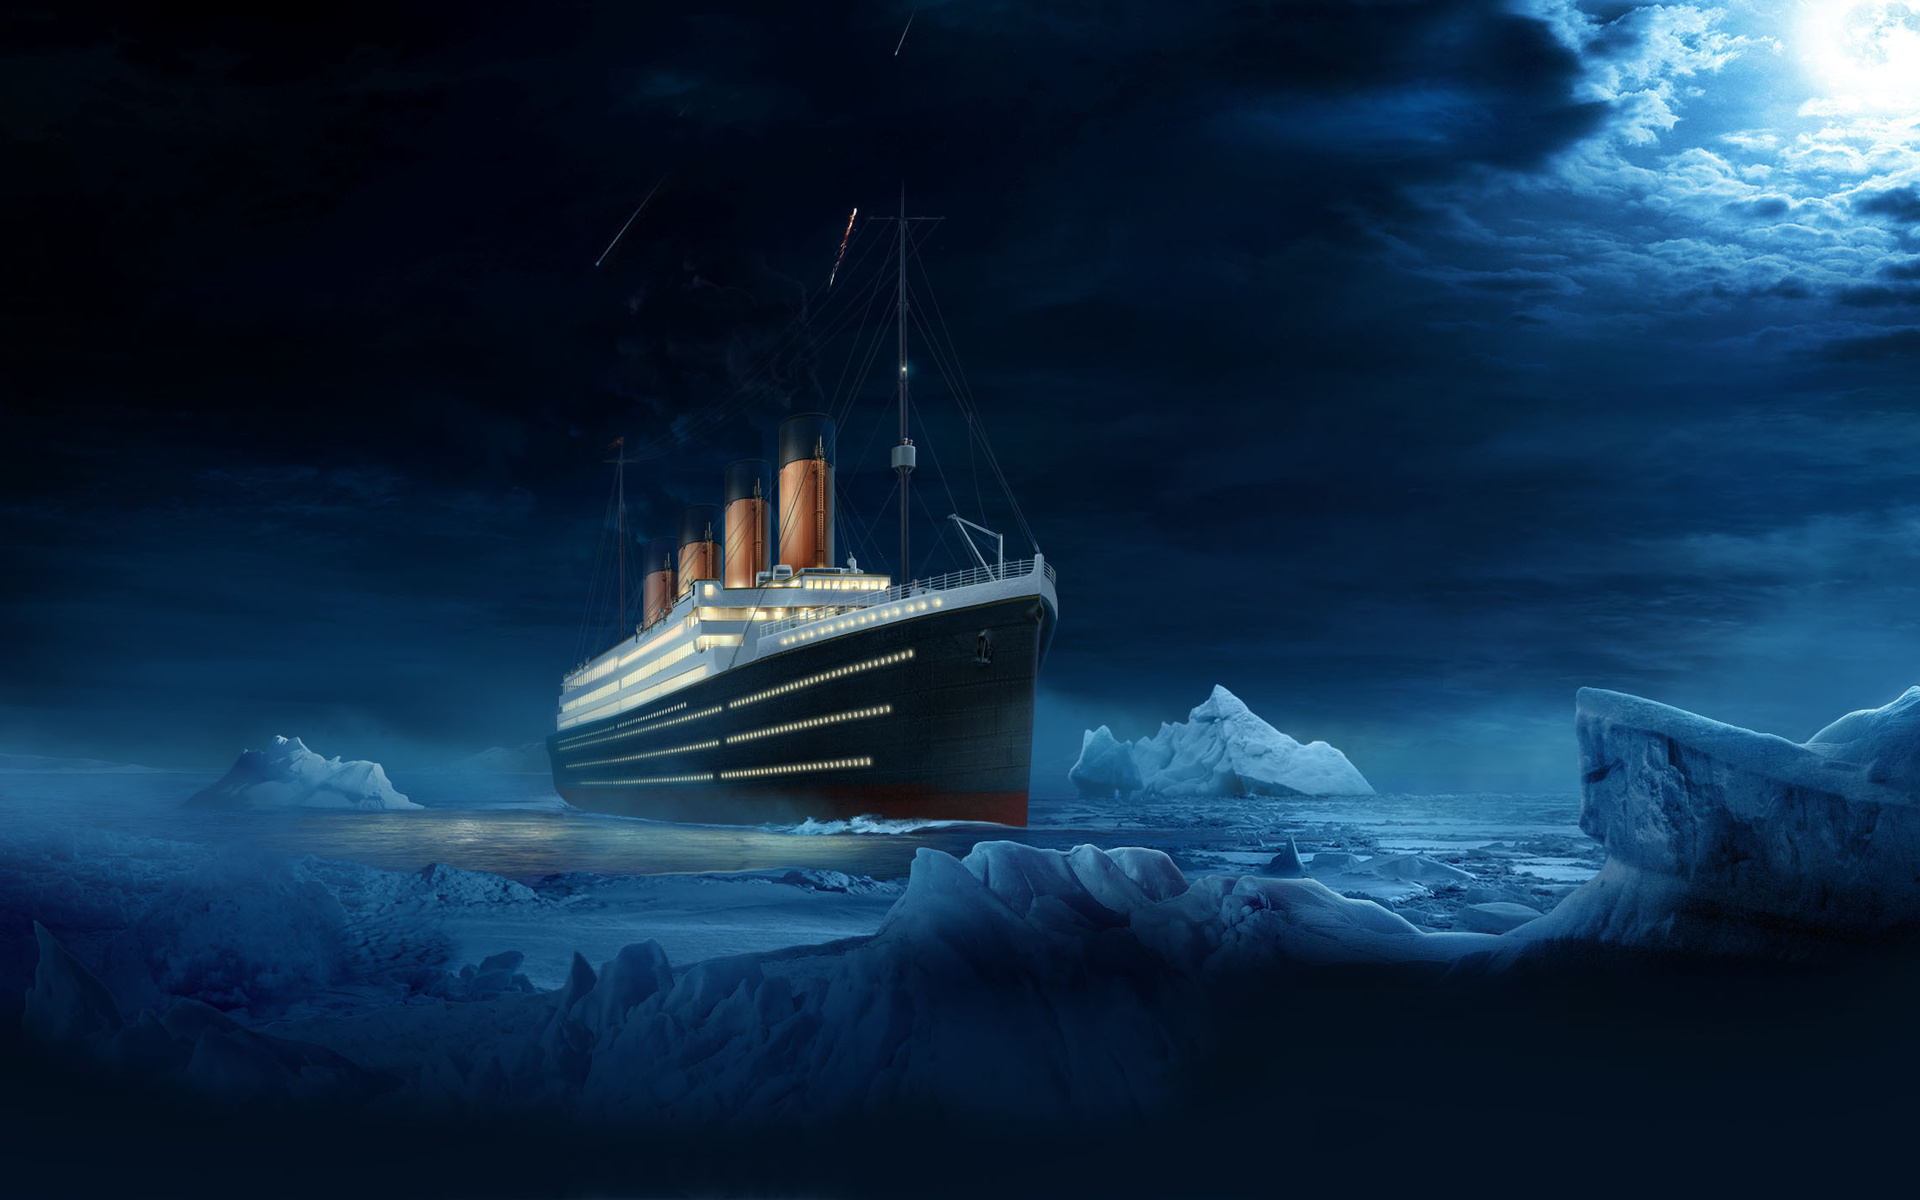 Titanic 2 Wallpapers Top Collections of Pictures Images Wallpaper